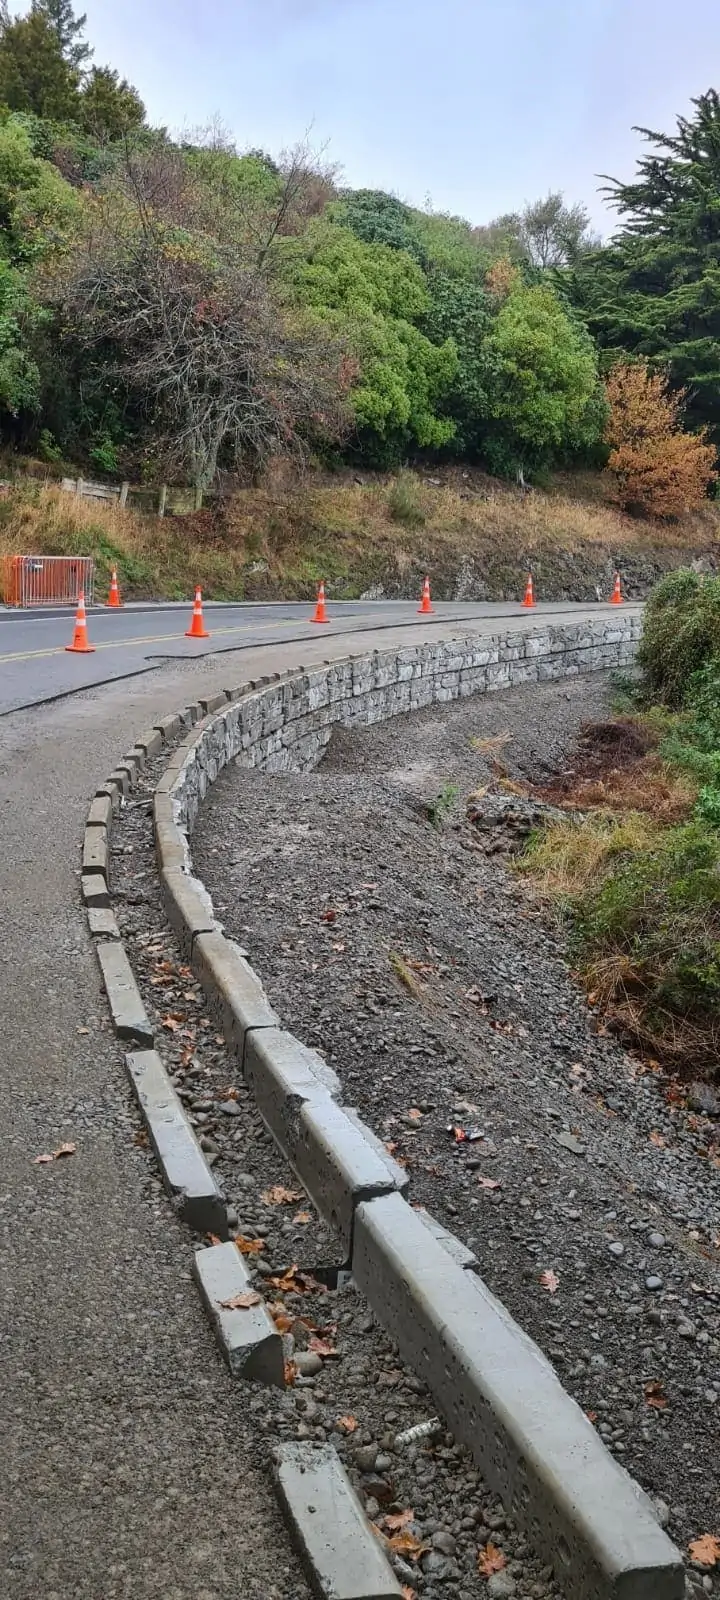 MagnumStone Retaining Wall Courses Mid-Installaiton in New Zealand.